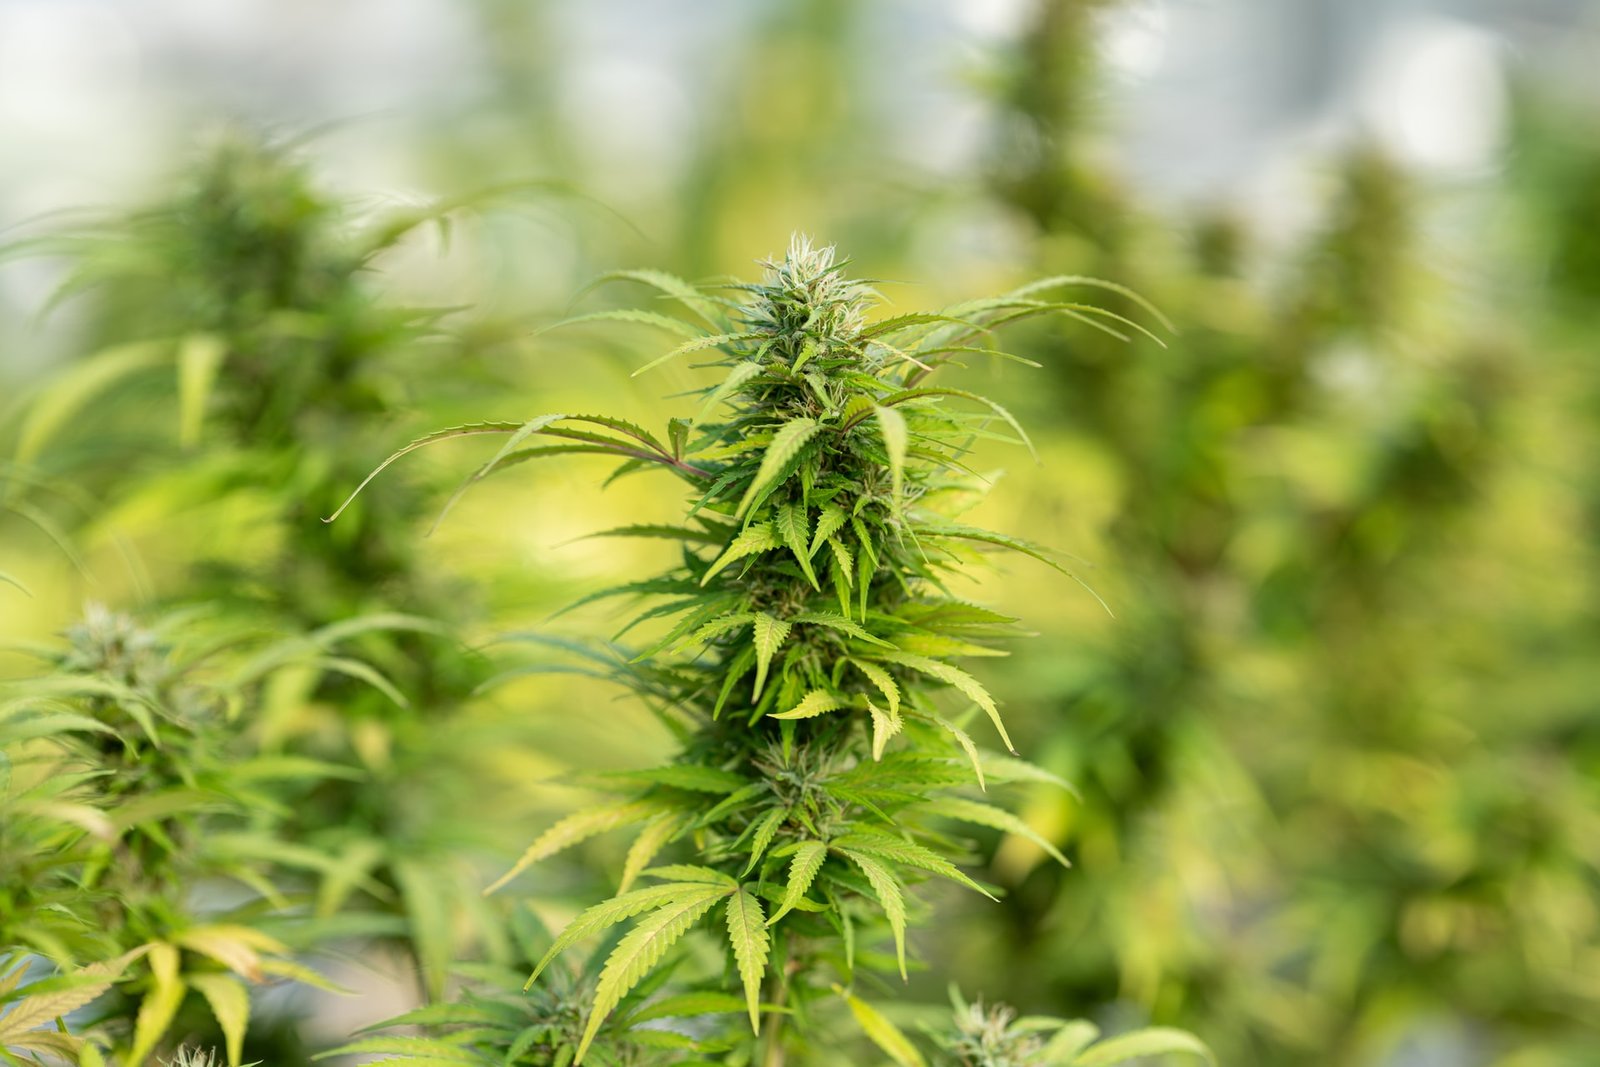 ANTG Hoping to Ship First Medical Cannabis Flower to New Zealand